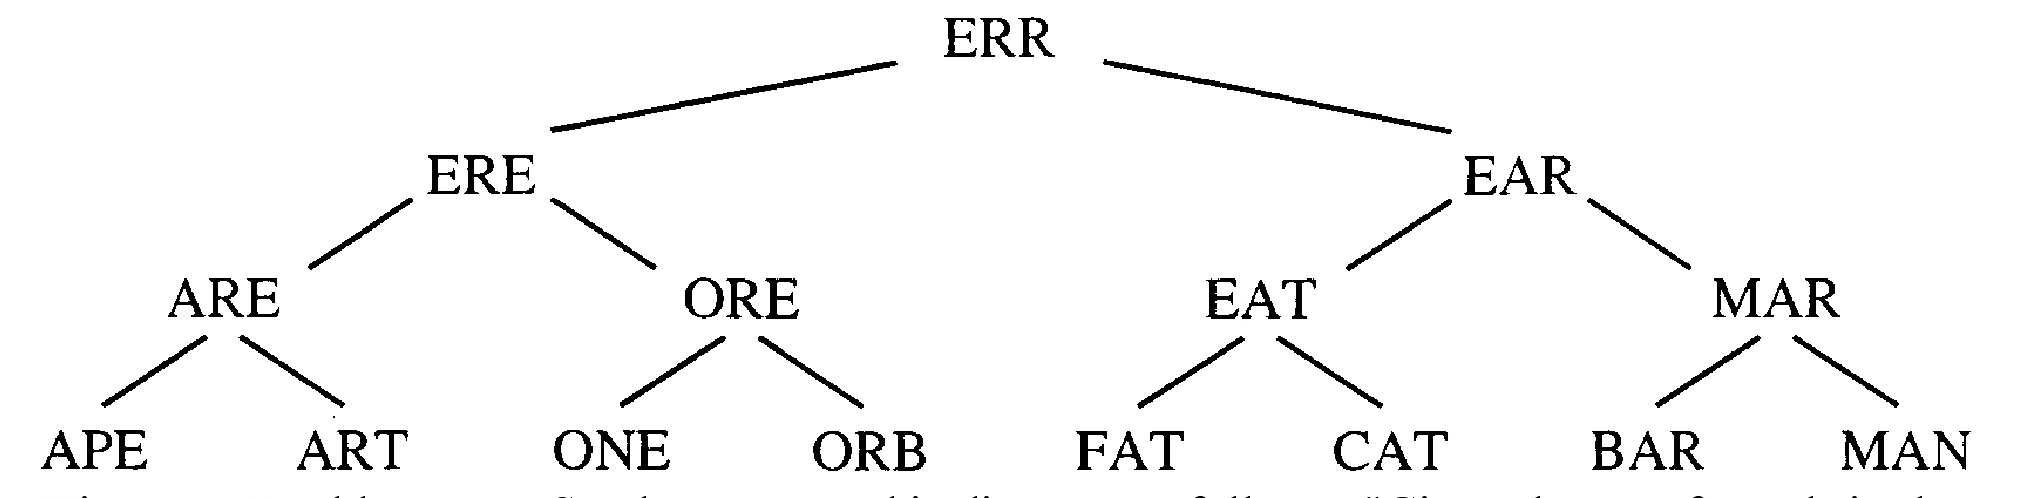 Tree diagram showing eight possible transformation series beginning with
                     